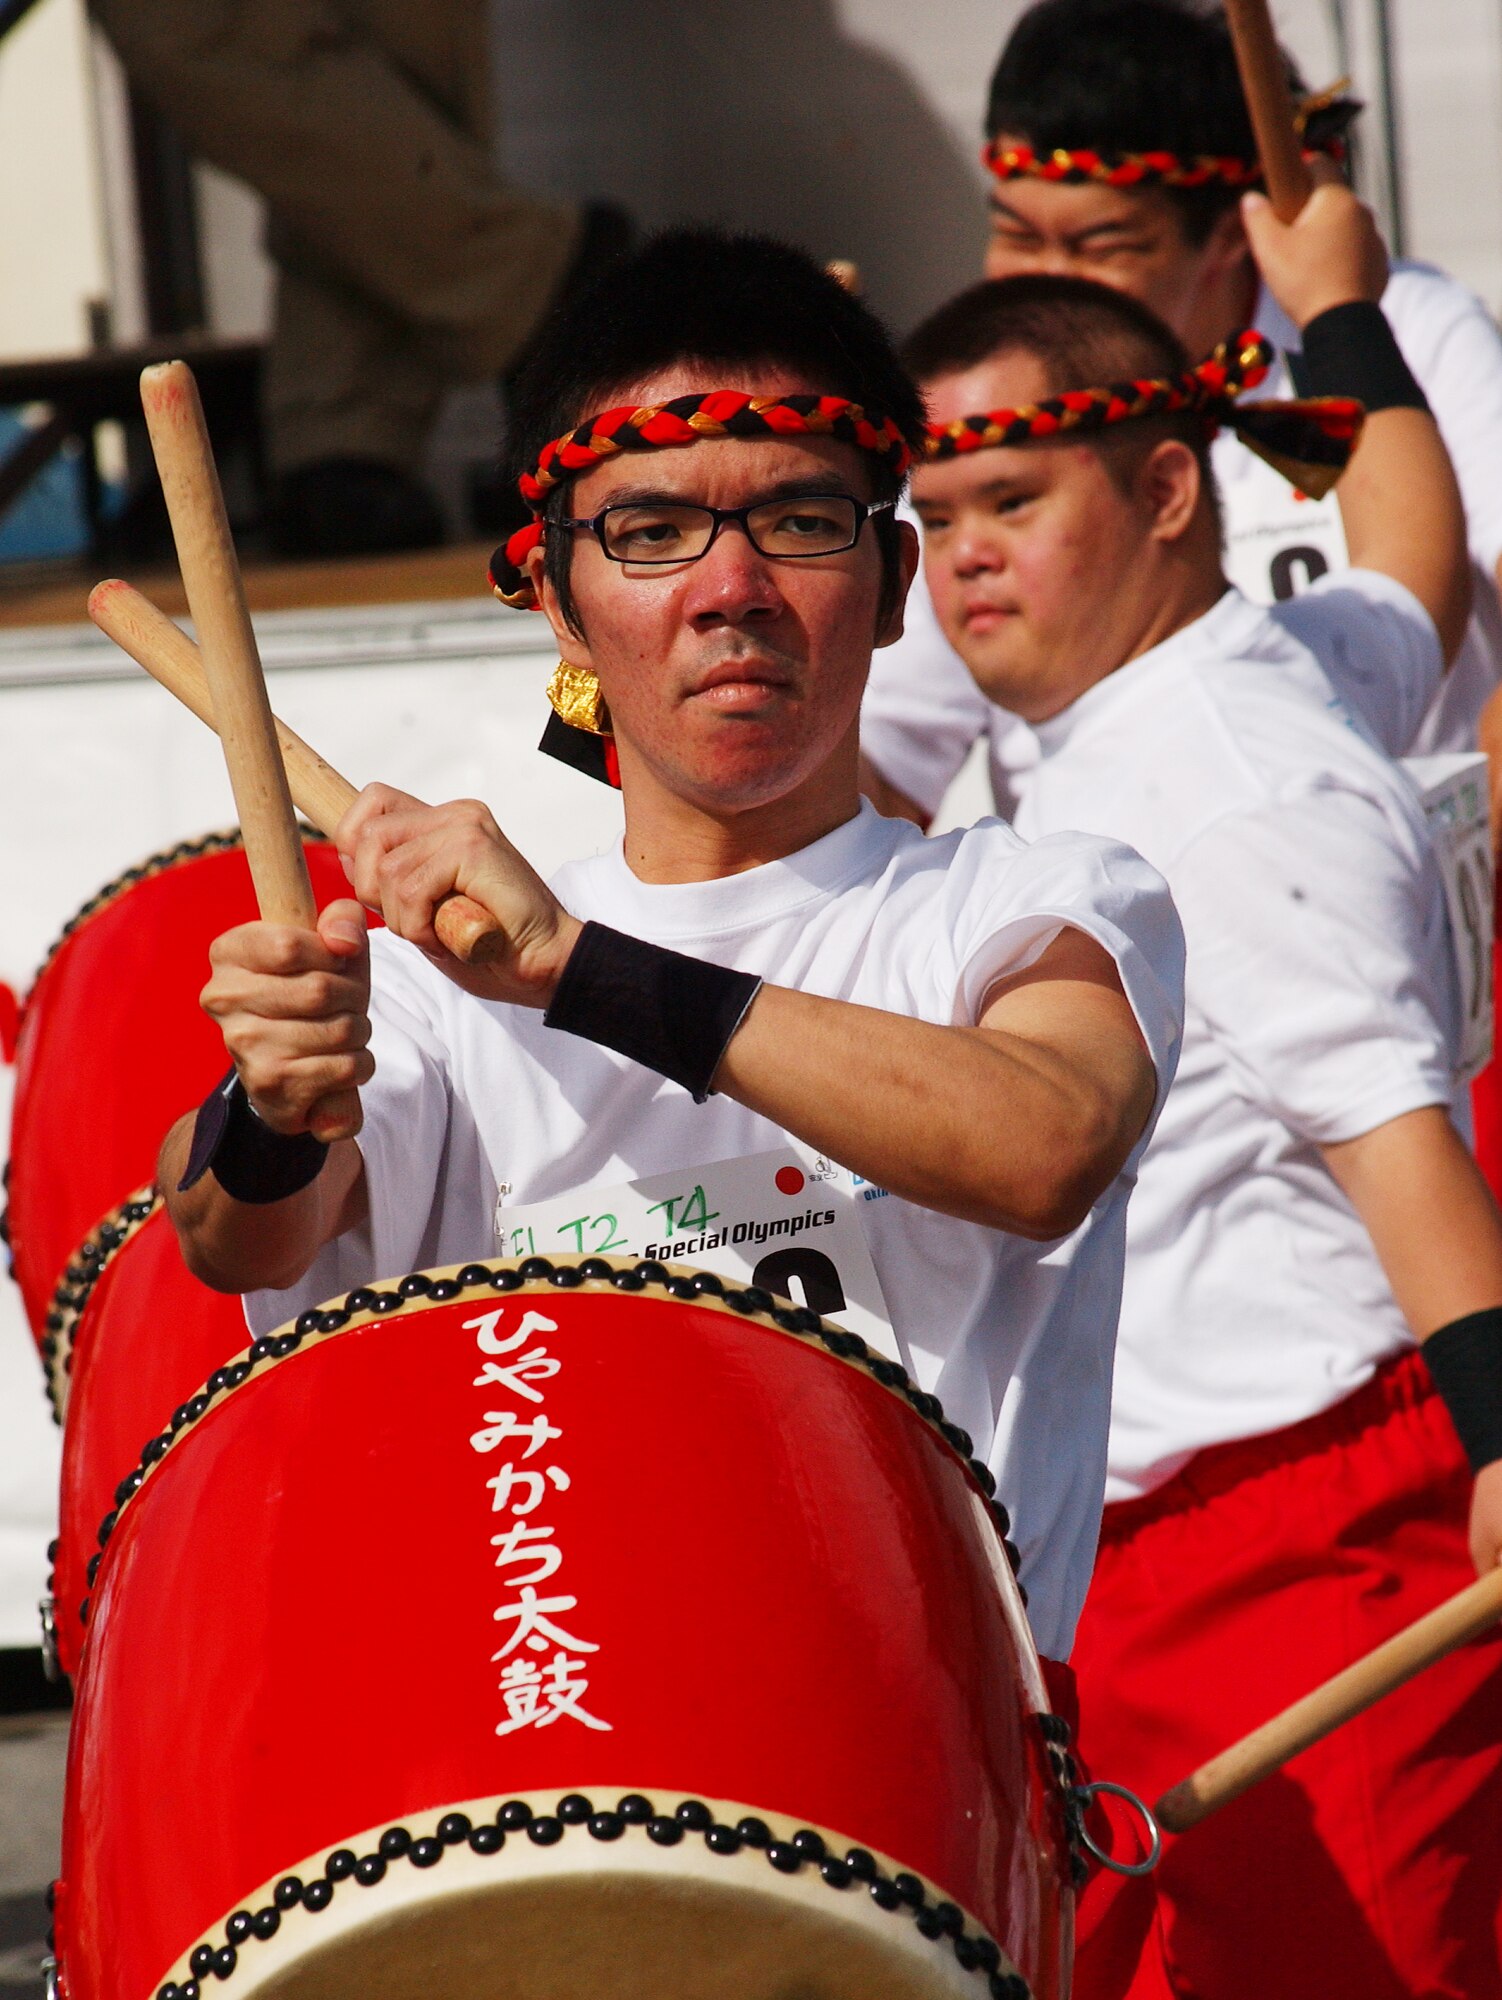 Military members and local Okinawans dance to the beat of the Eisa drummers during the Kadena Special Olympics, Nov. 14, 2009 at Kadena Air Base, Japan. Kadena hosted the 10th Annual Special Olympic Games and Art Festival for special needs Okinawan and American adult and child athletes.
(U.S. Air Force photo/Tech. Sgt. Reynaldo Ramon) 
